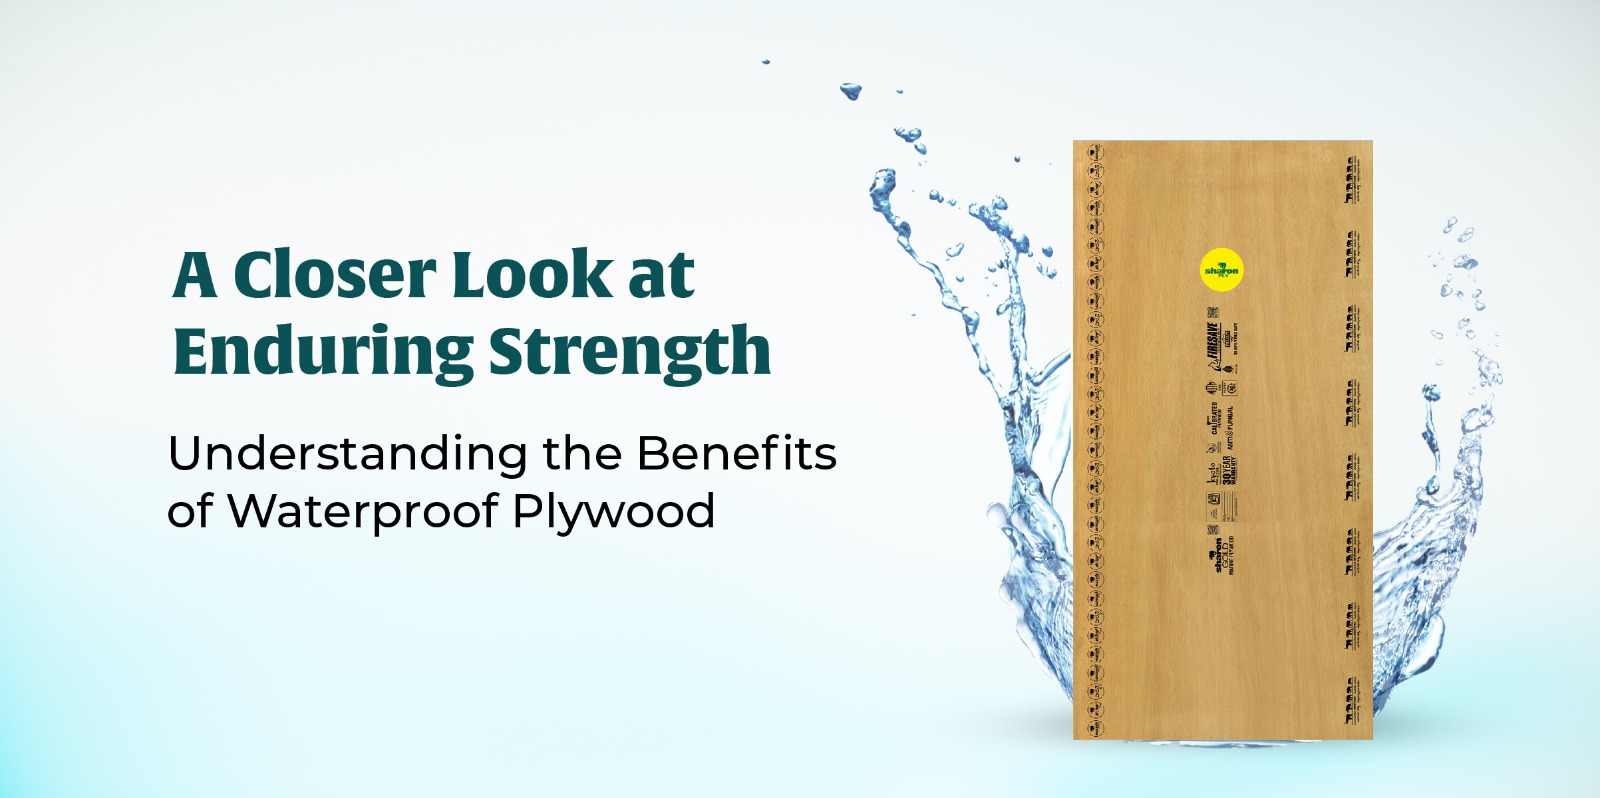 A Closer Look at Enduring Strength: Understanding the Benefits of Waterproof Plywood